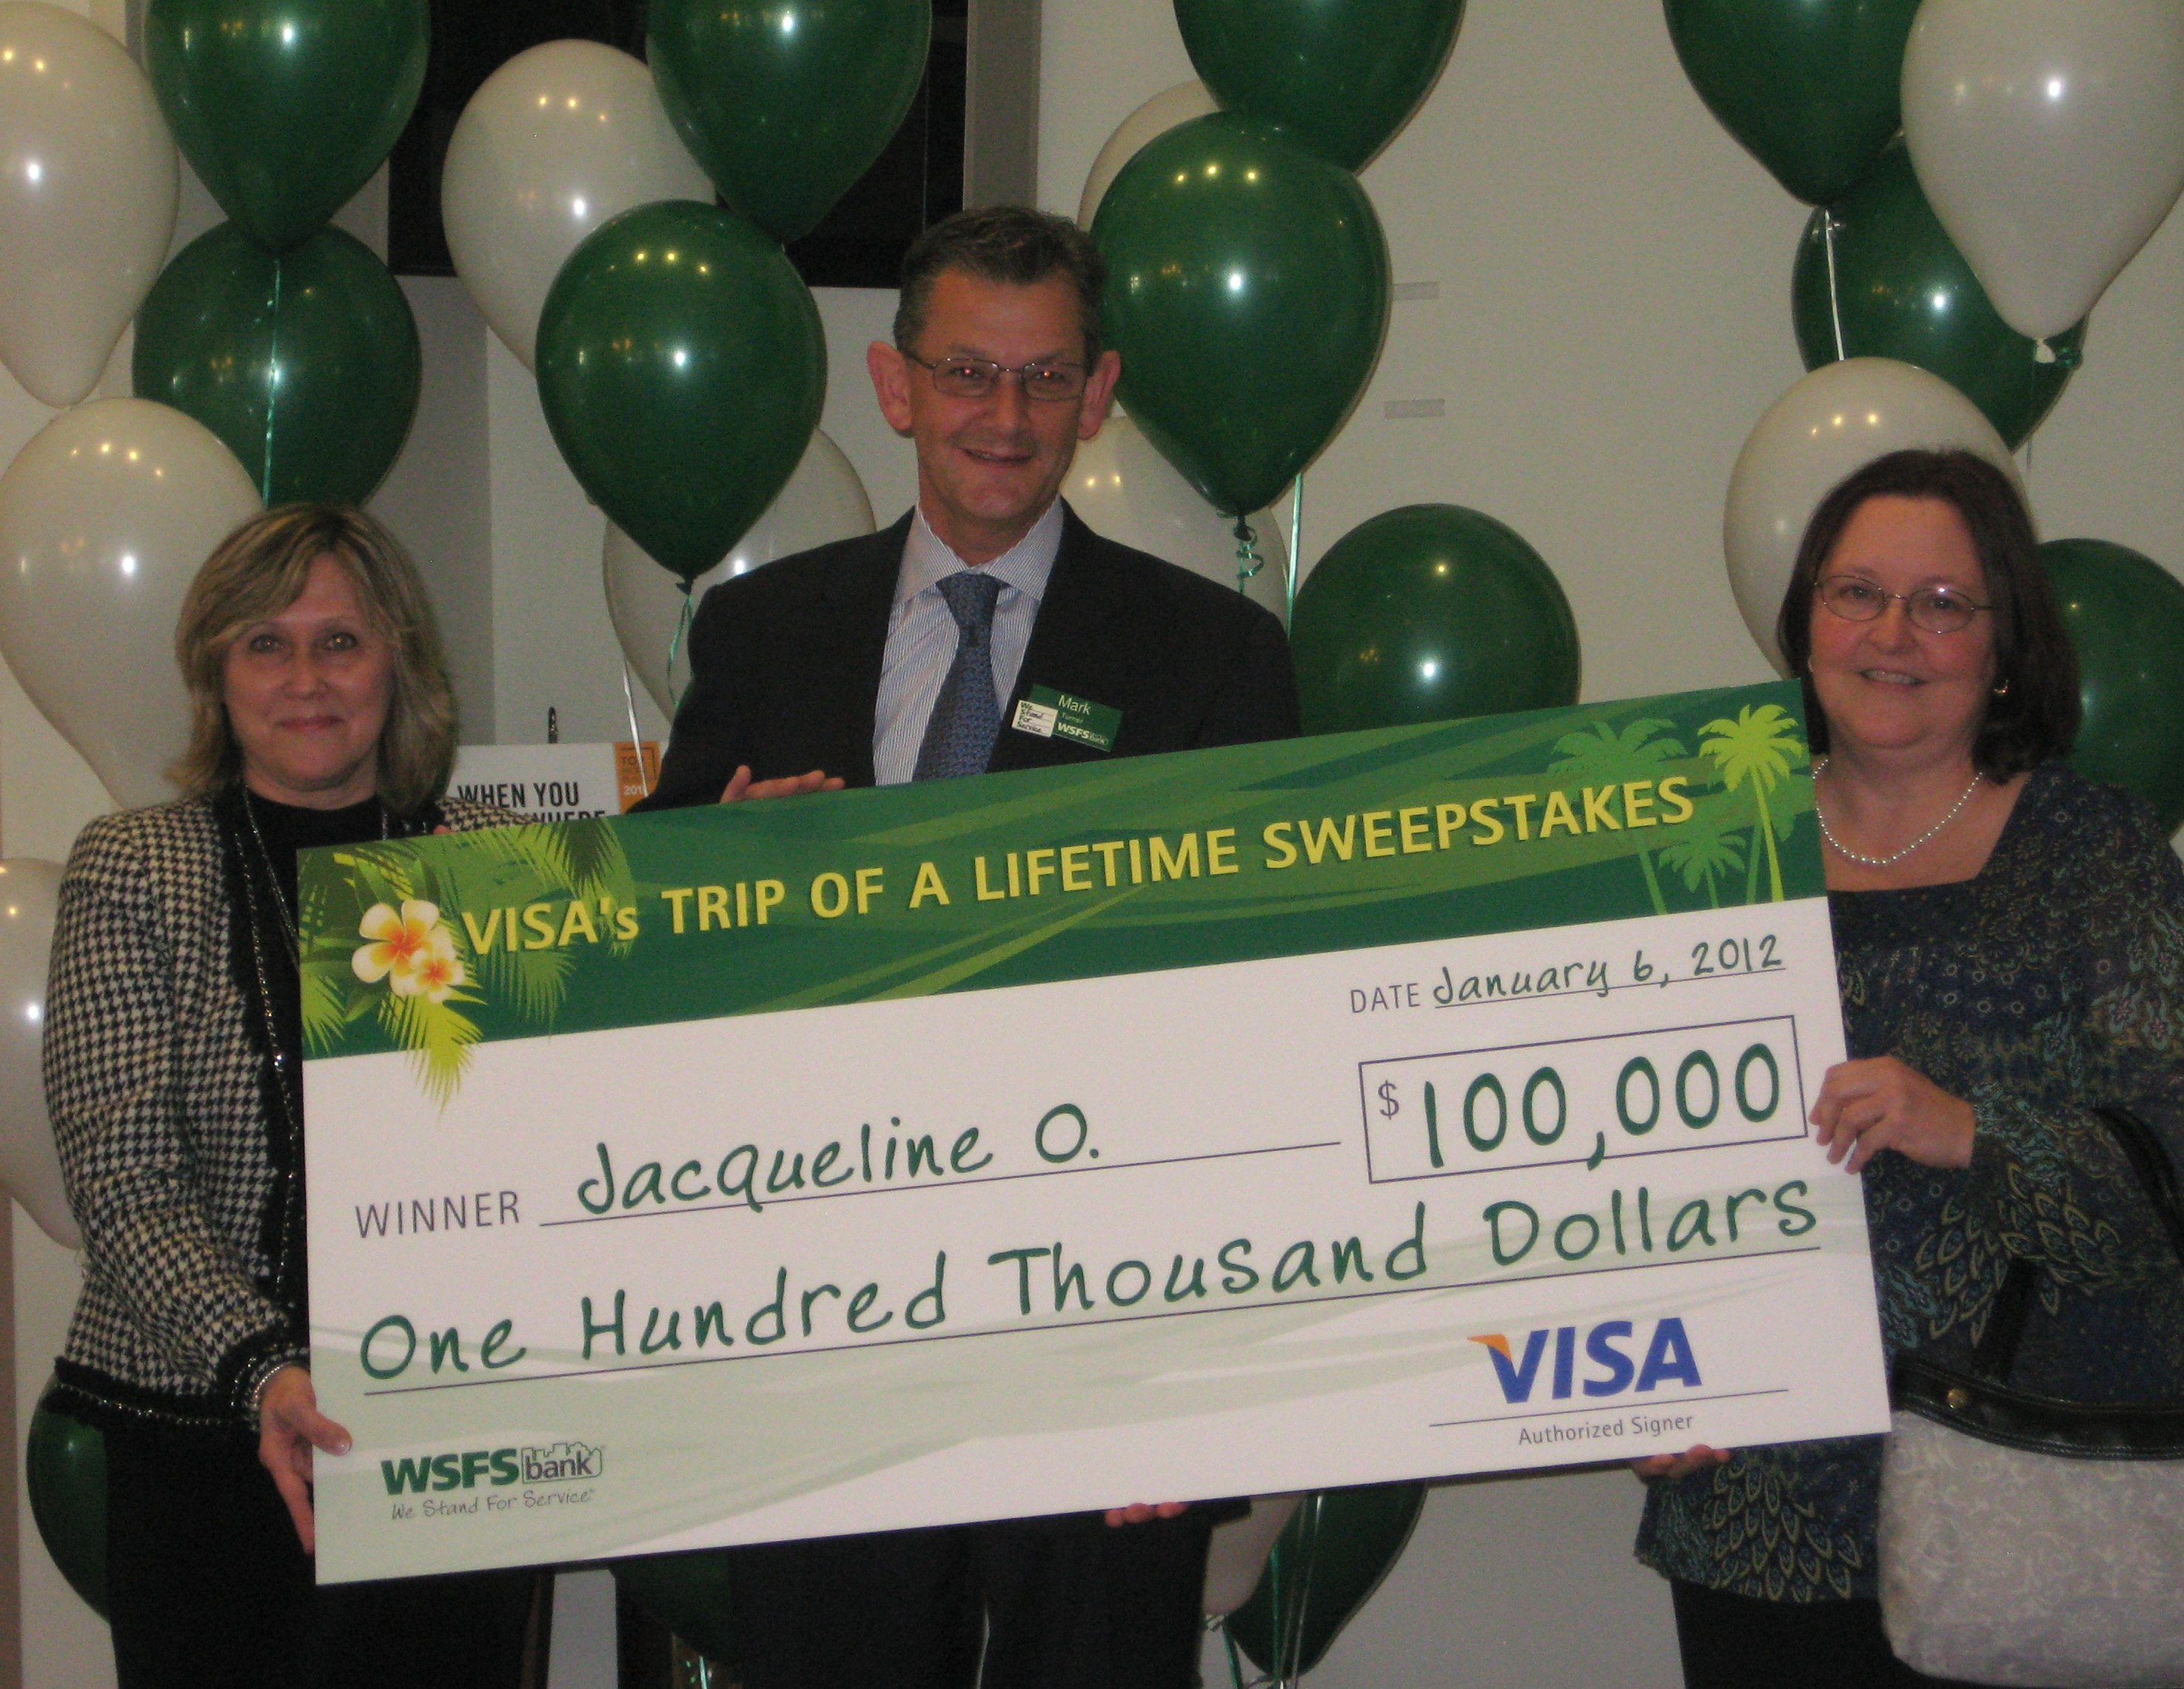 WSFS BANK CUSTOMER WINS $100,000 IN VISA'S TRIP OF A LIFETIME SWEEPSTAKES 